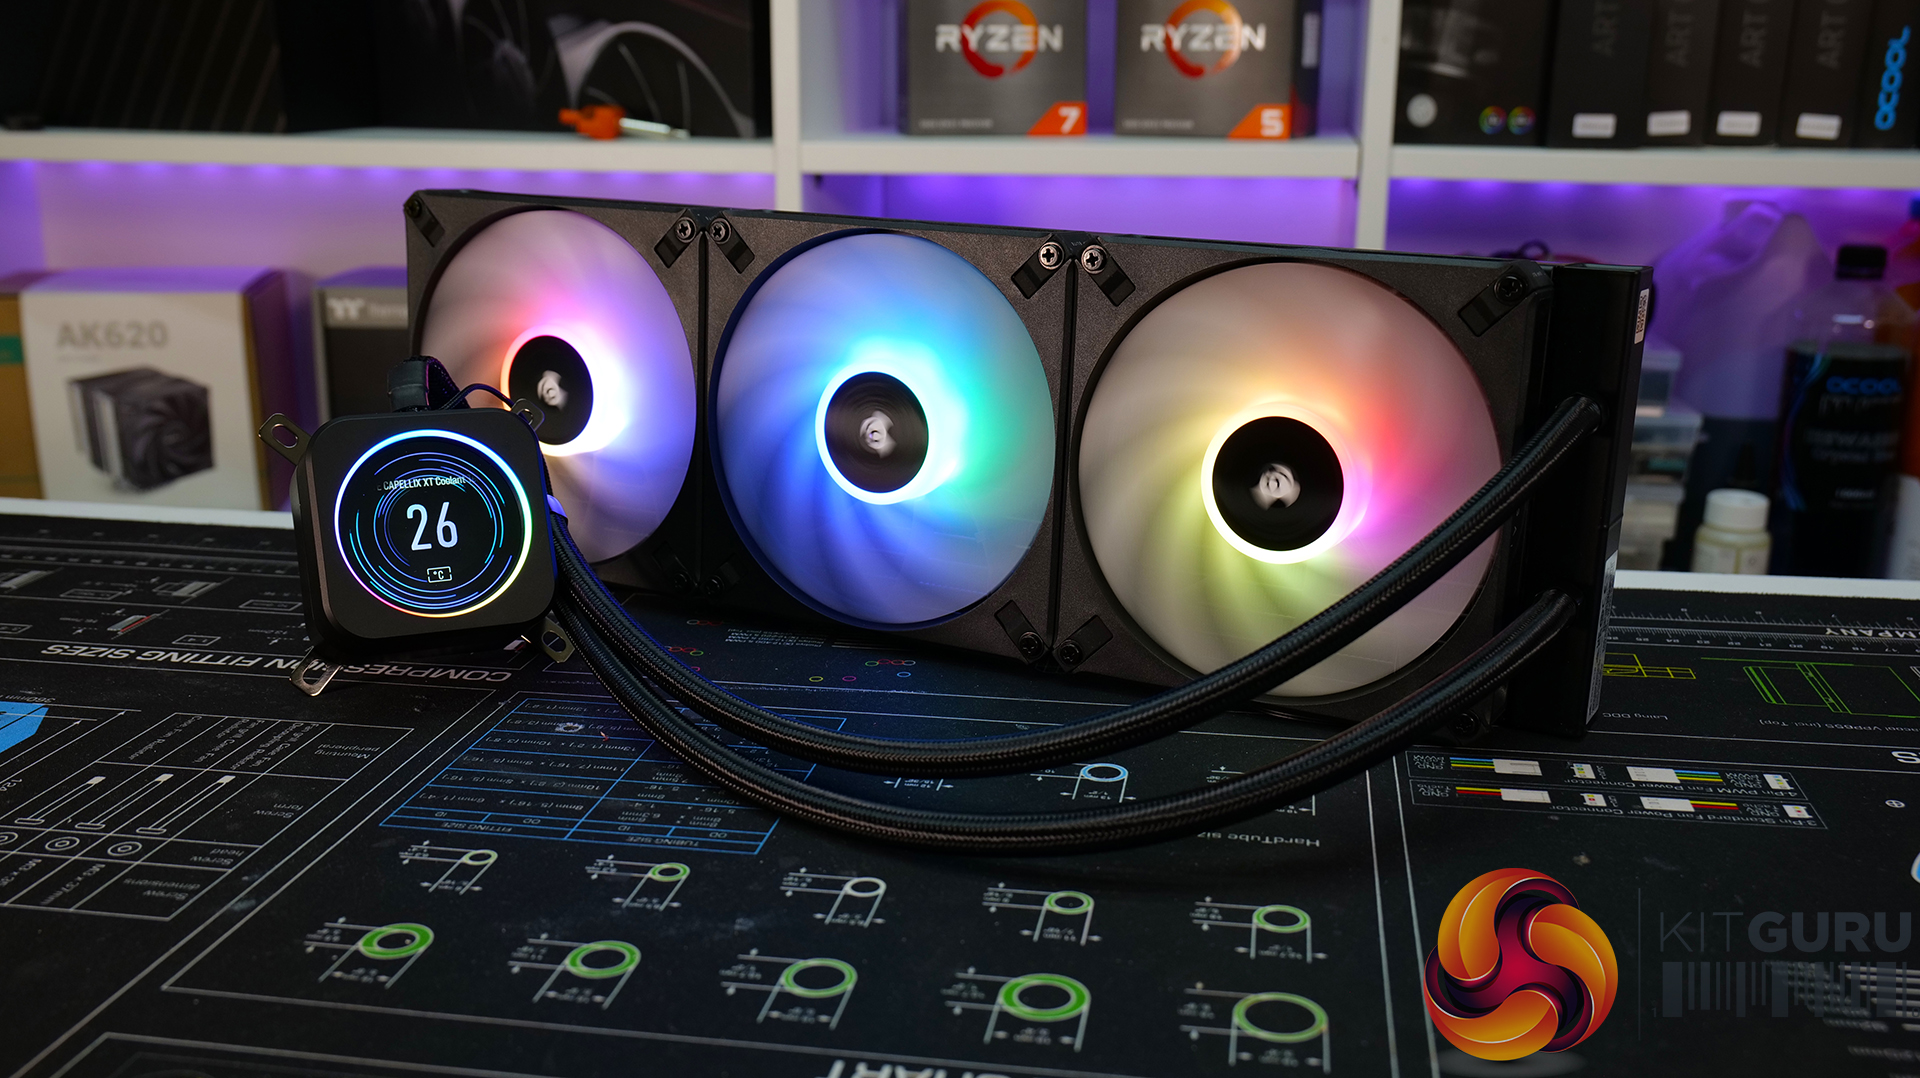 CORSAIR Launches New LCD-Equipped AIO CPU Coolers for the iCUE